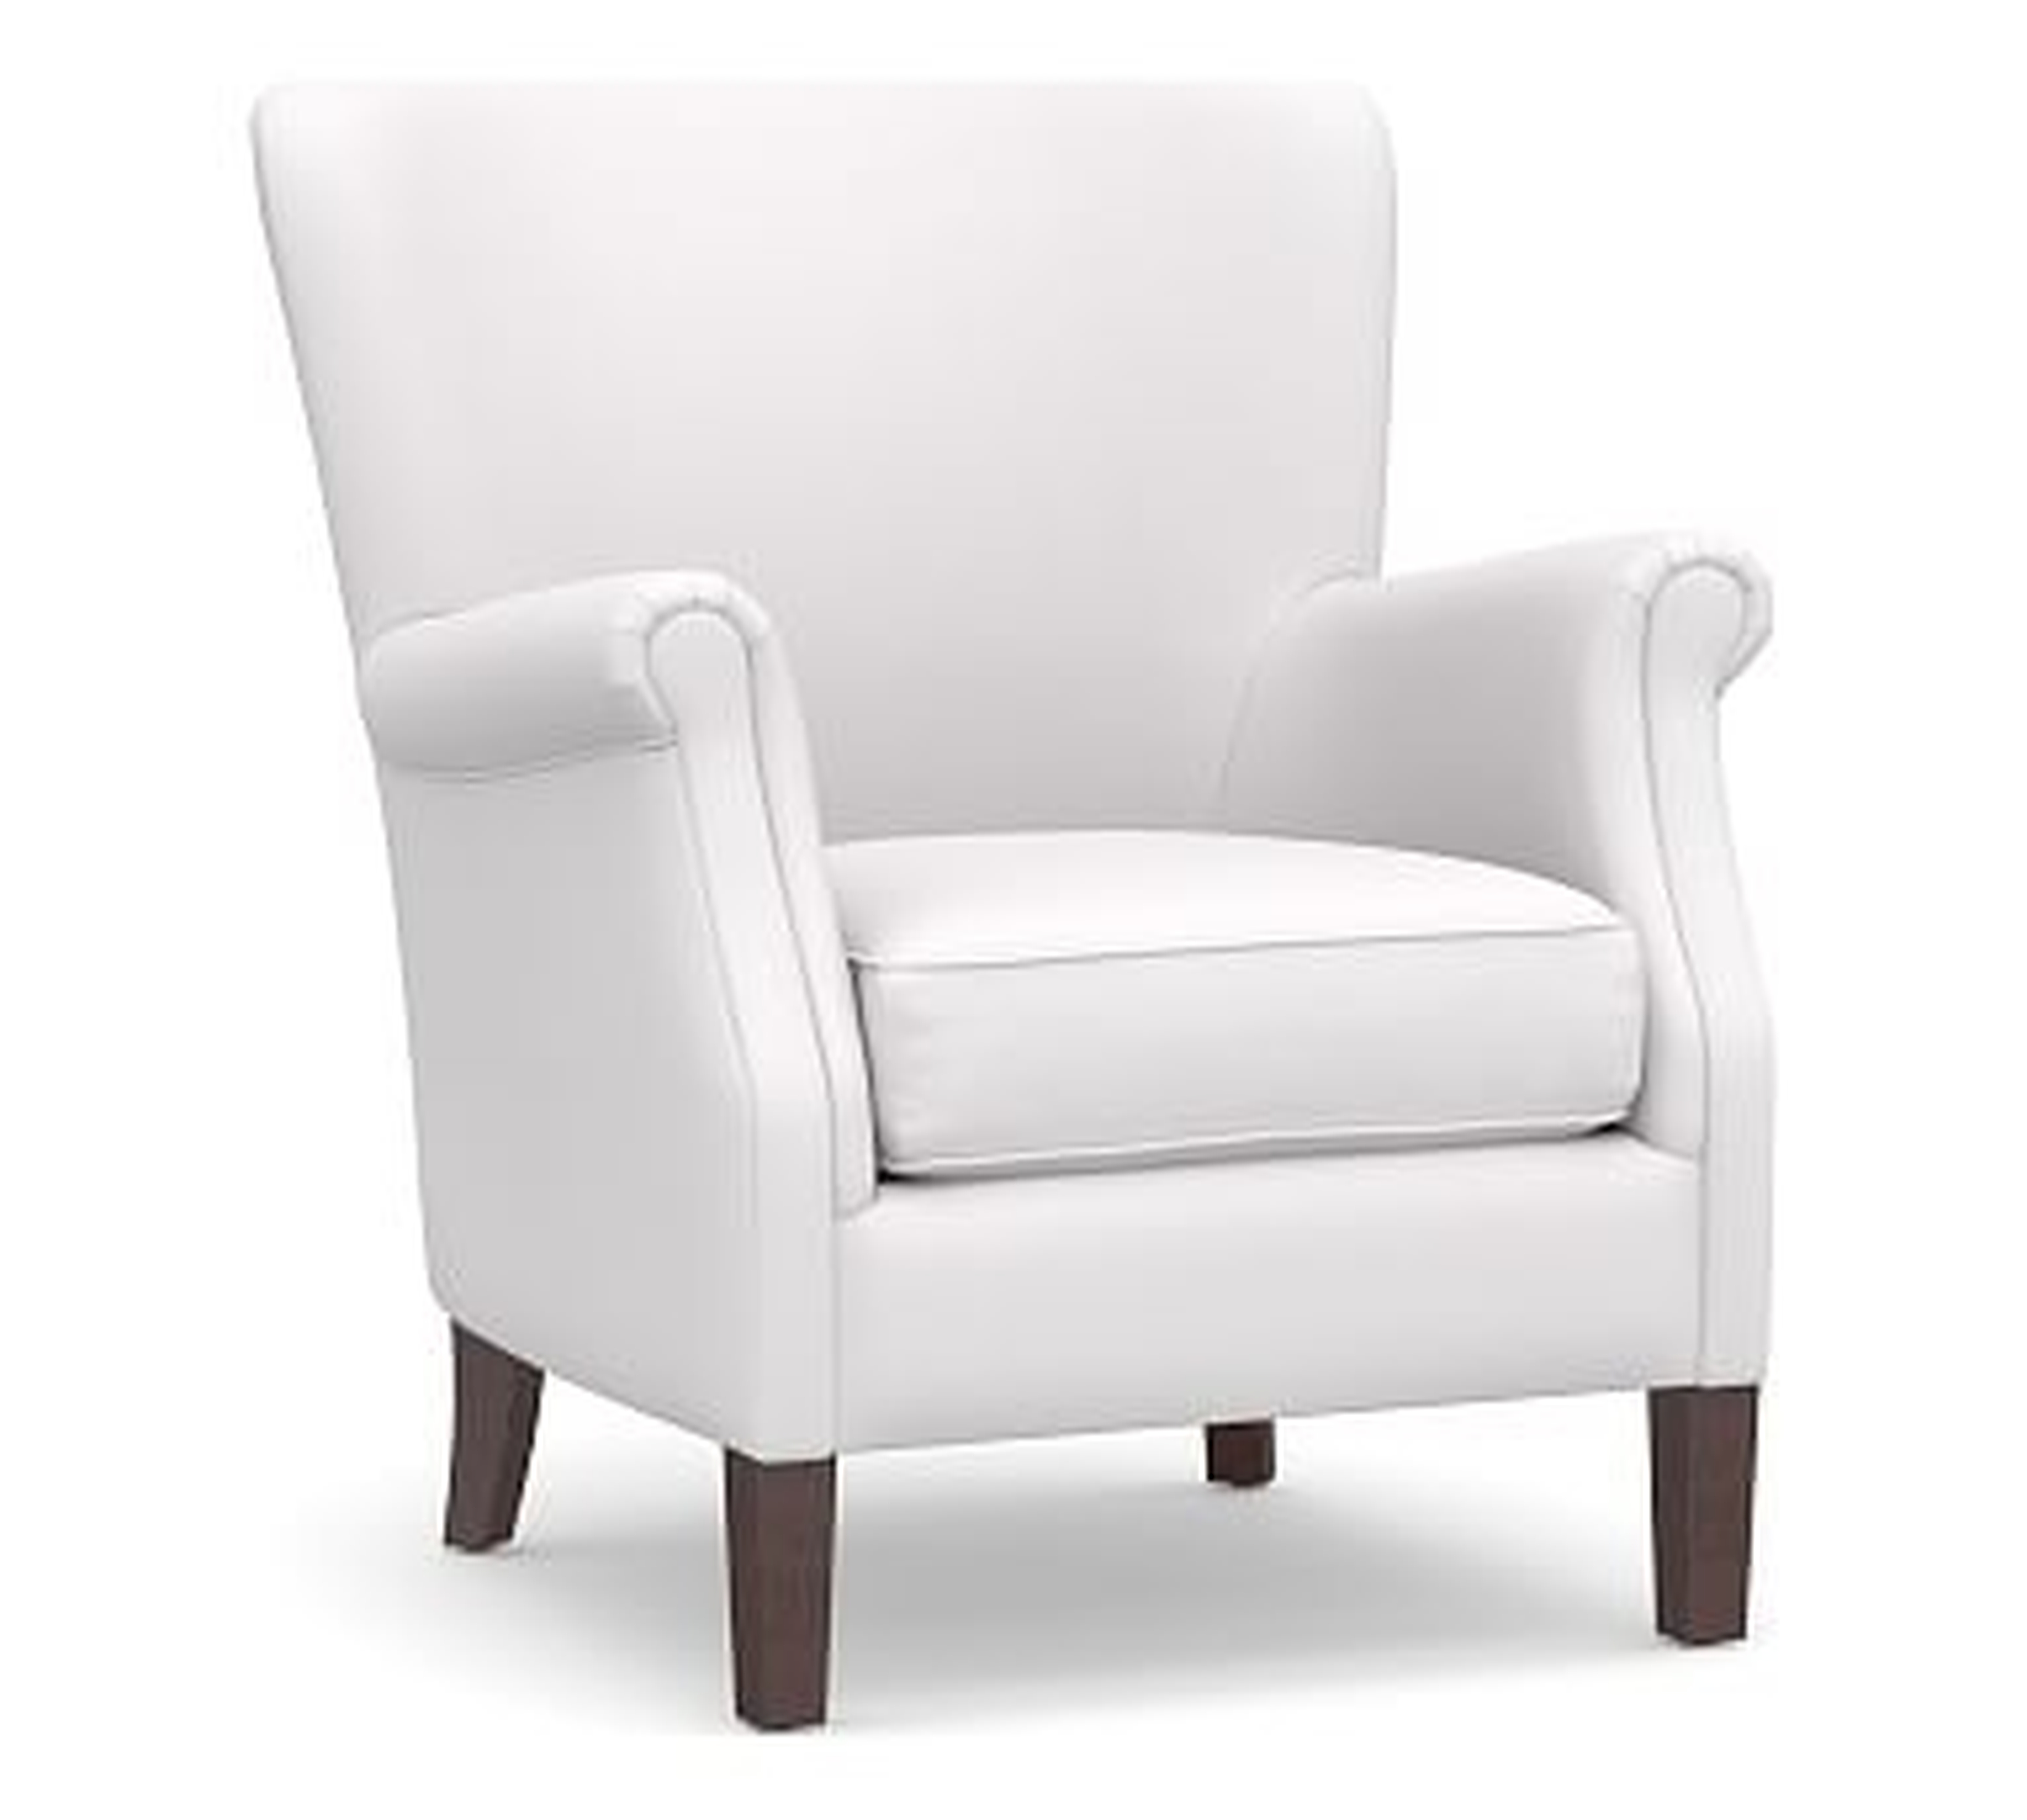 SoMa Minna Upholstered Armchair, Polyester Wrapped Cushions, Twill White - Pottery Barn